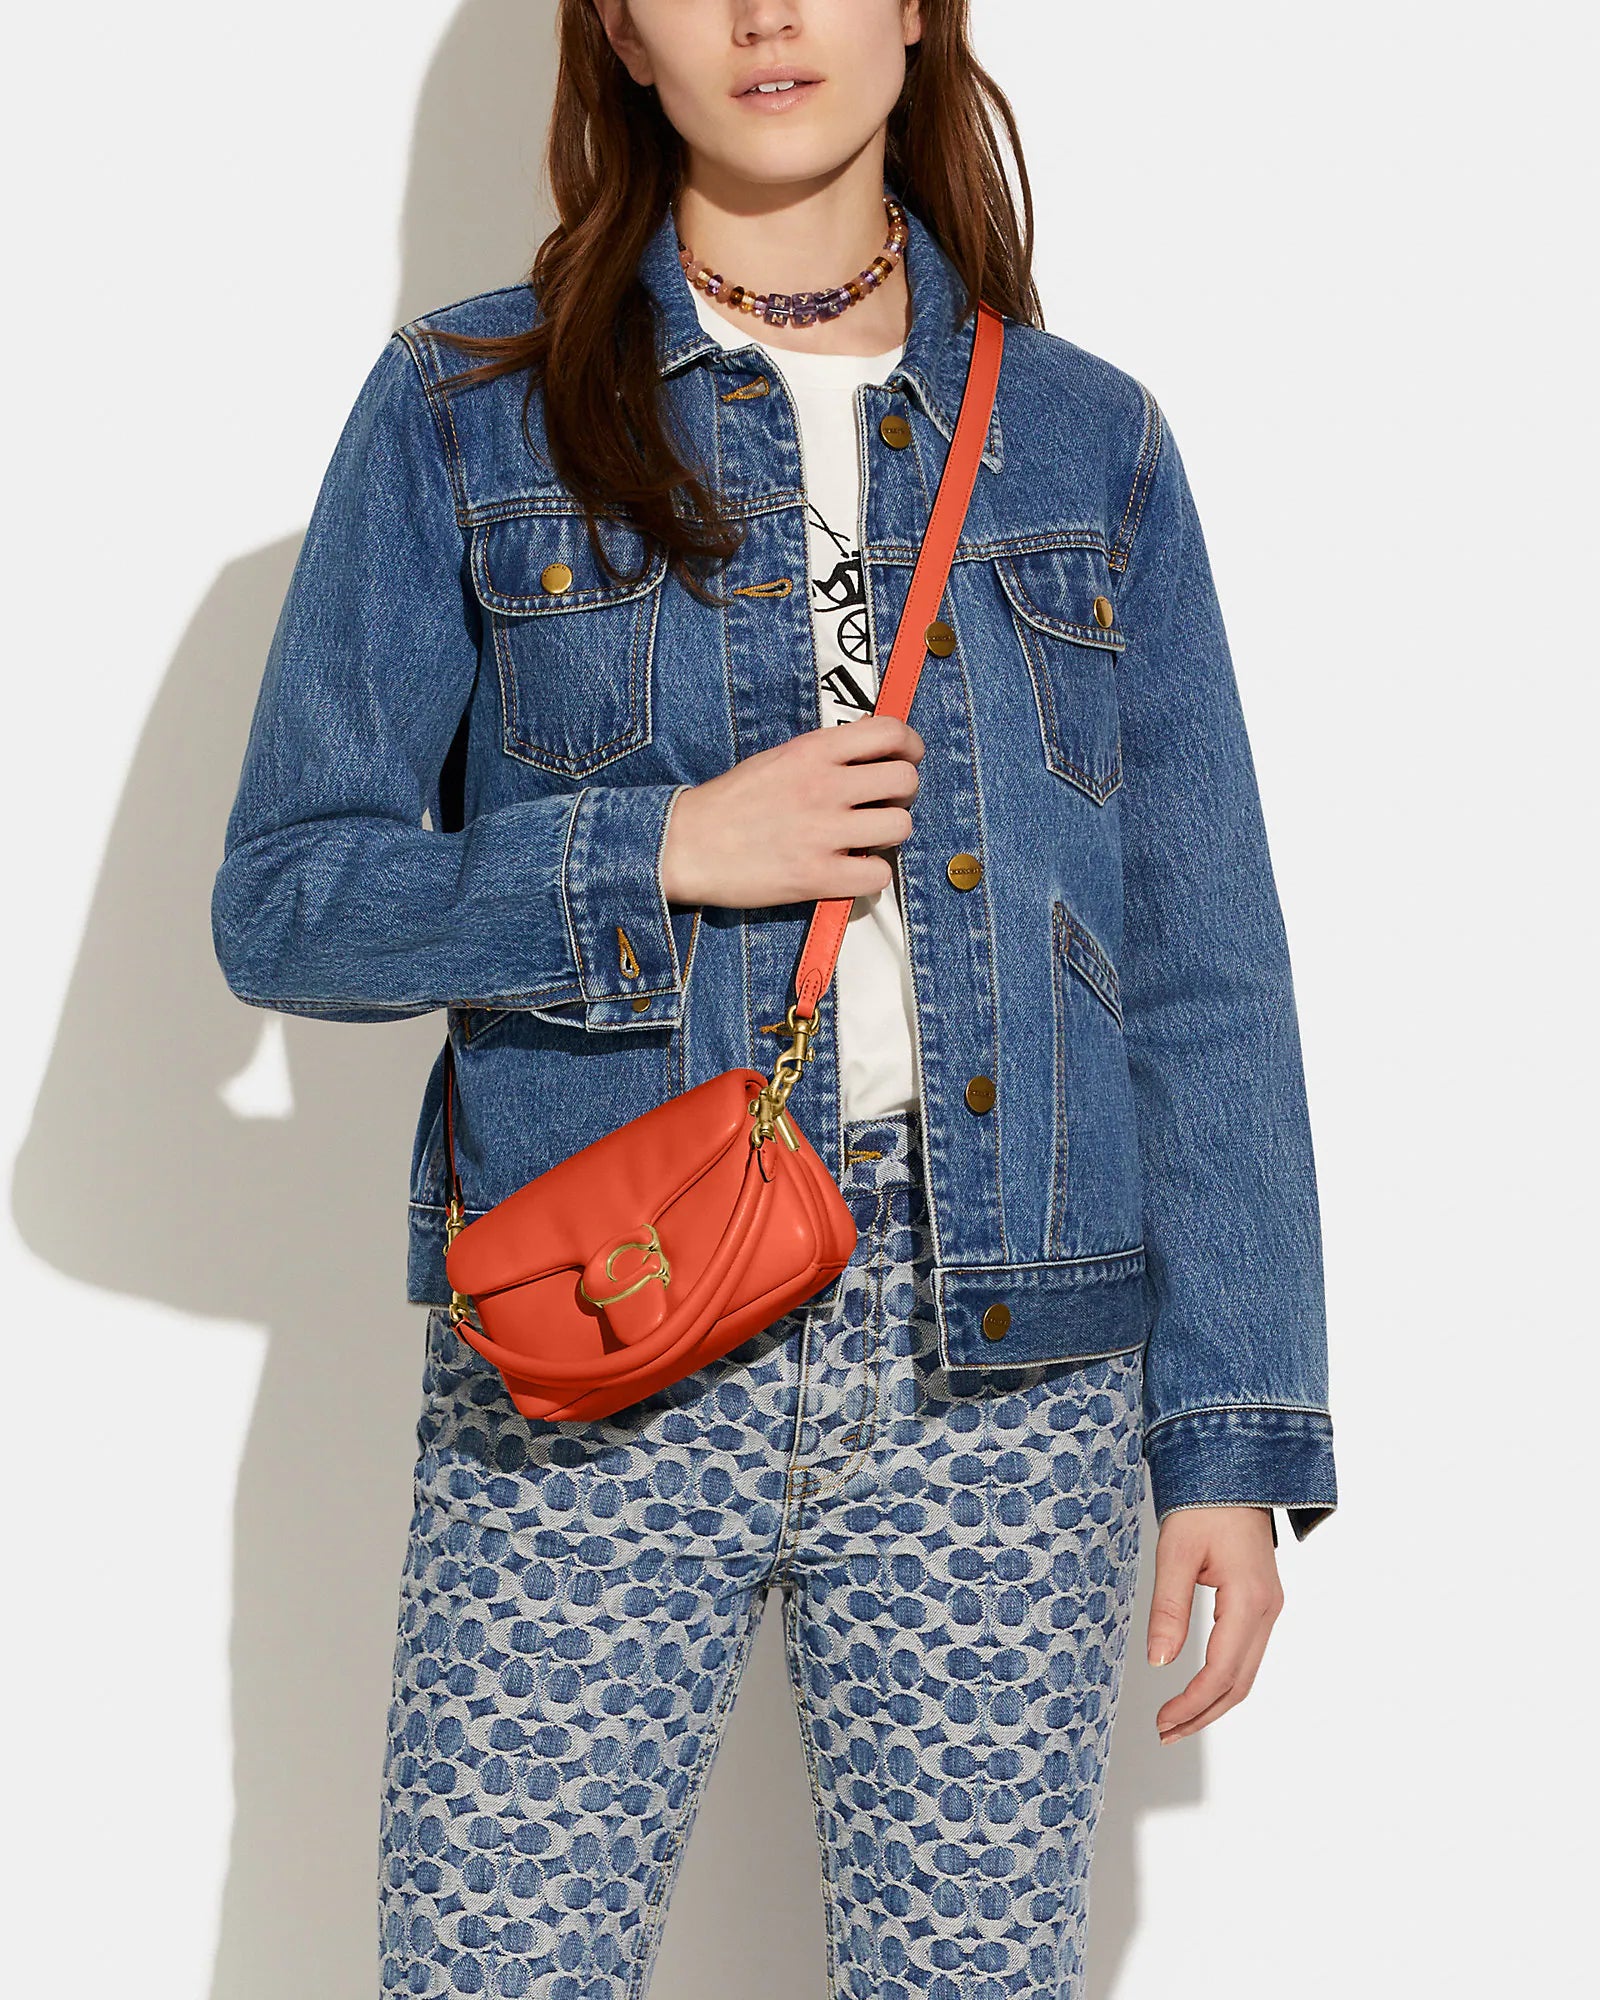 Coach PILLOW MADISON SHOULDER BAG IN SIGNATURE DENIM WITH QUILTING